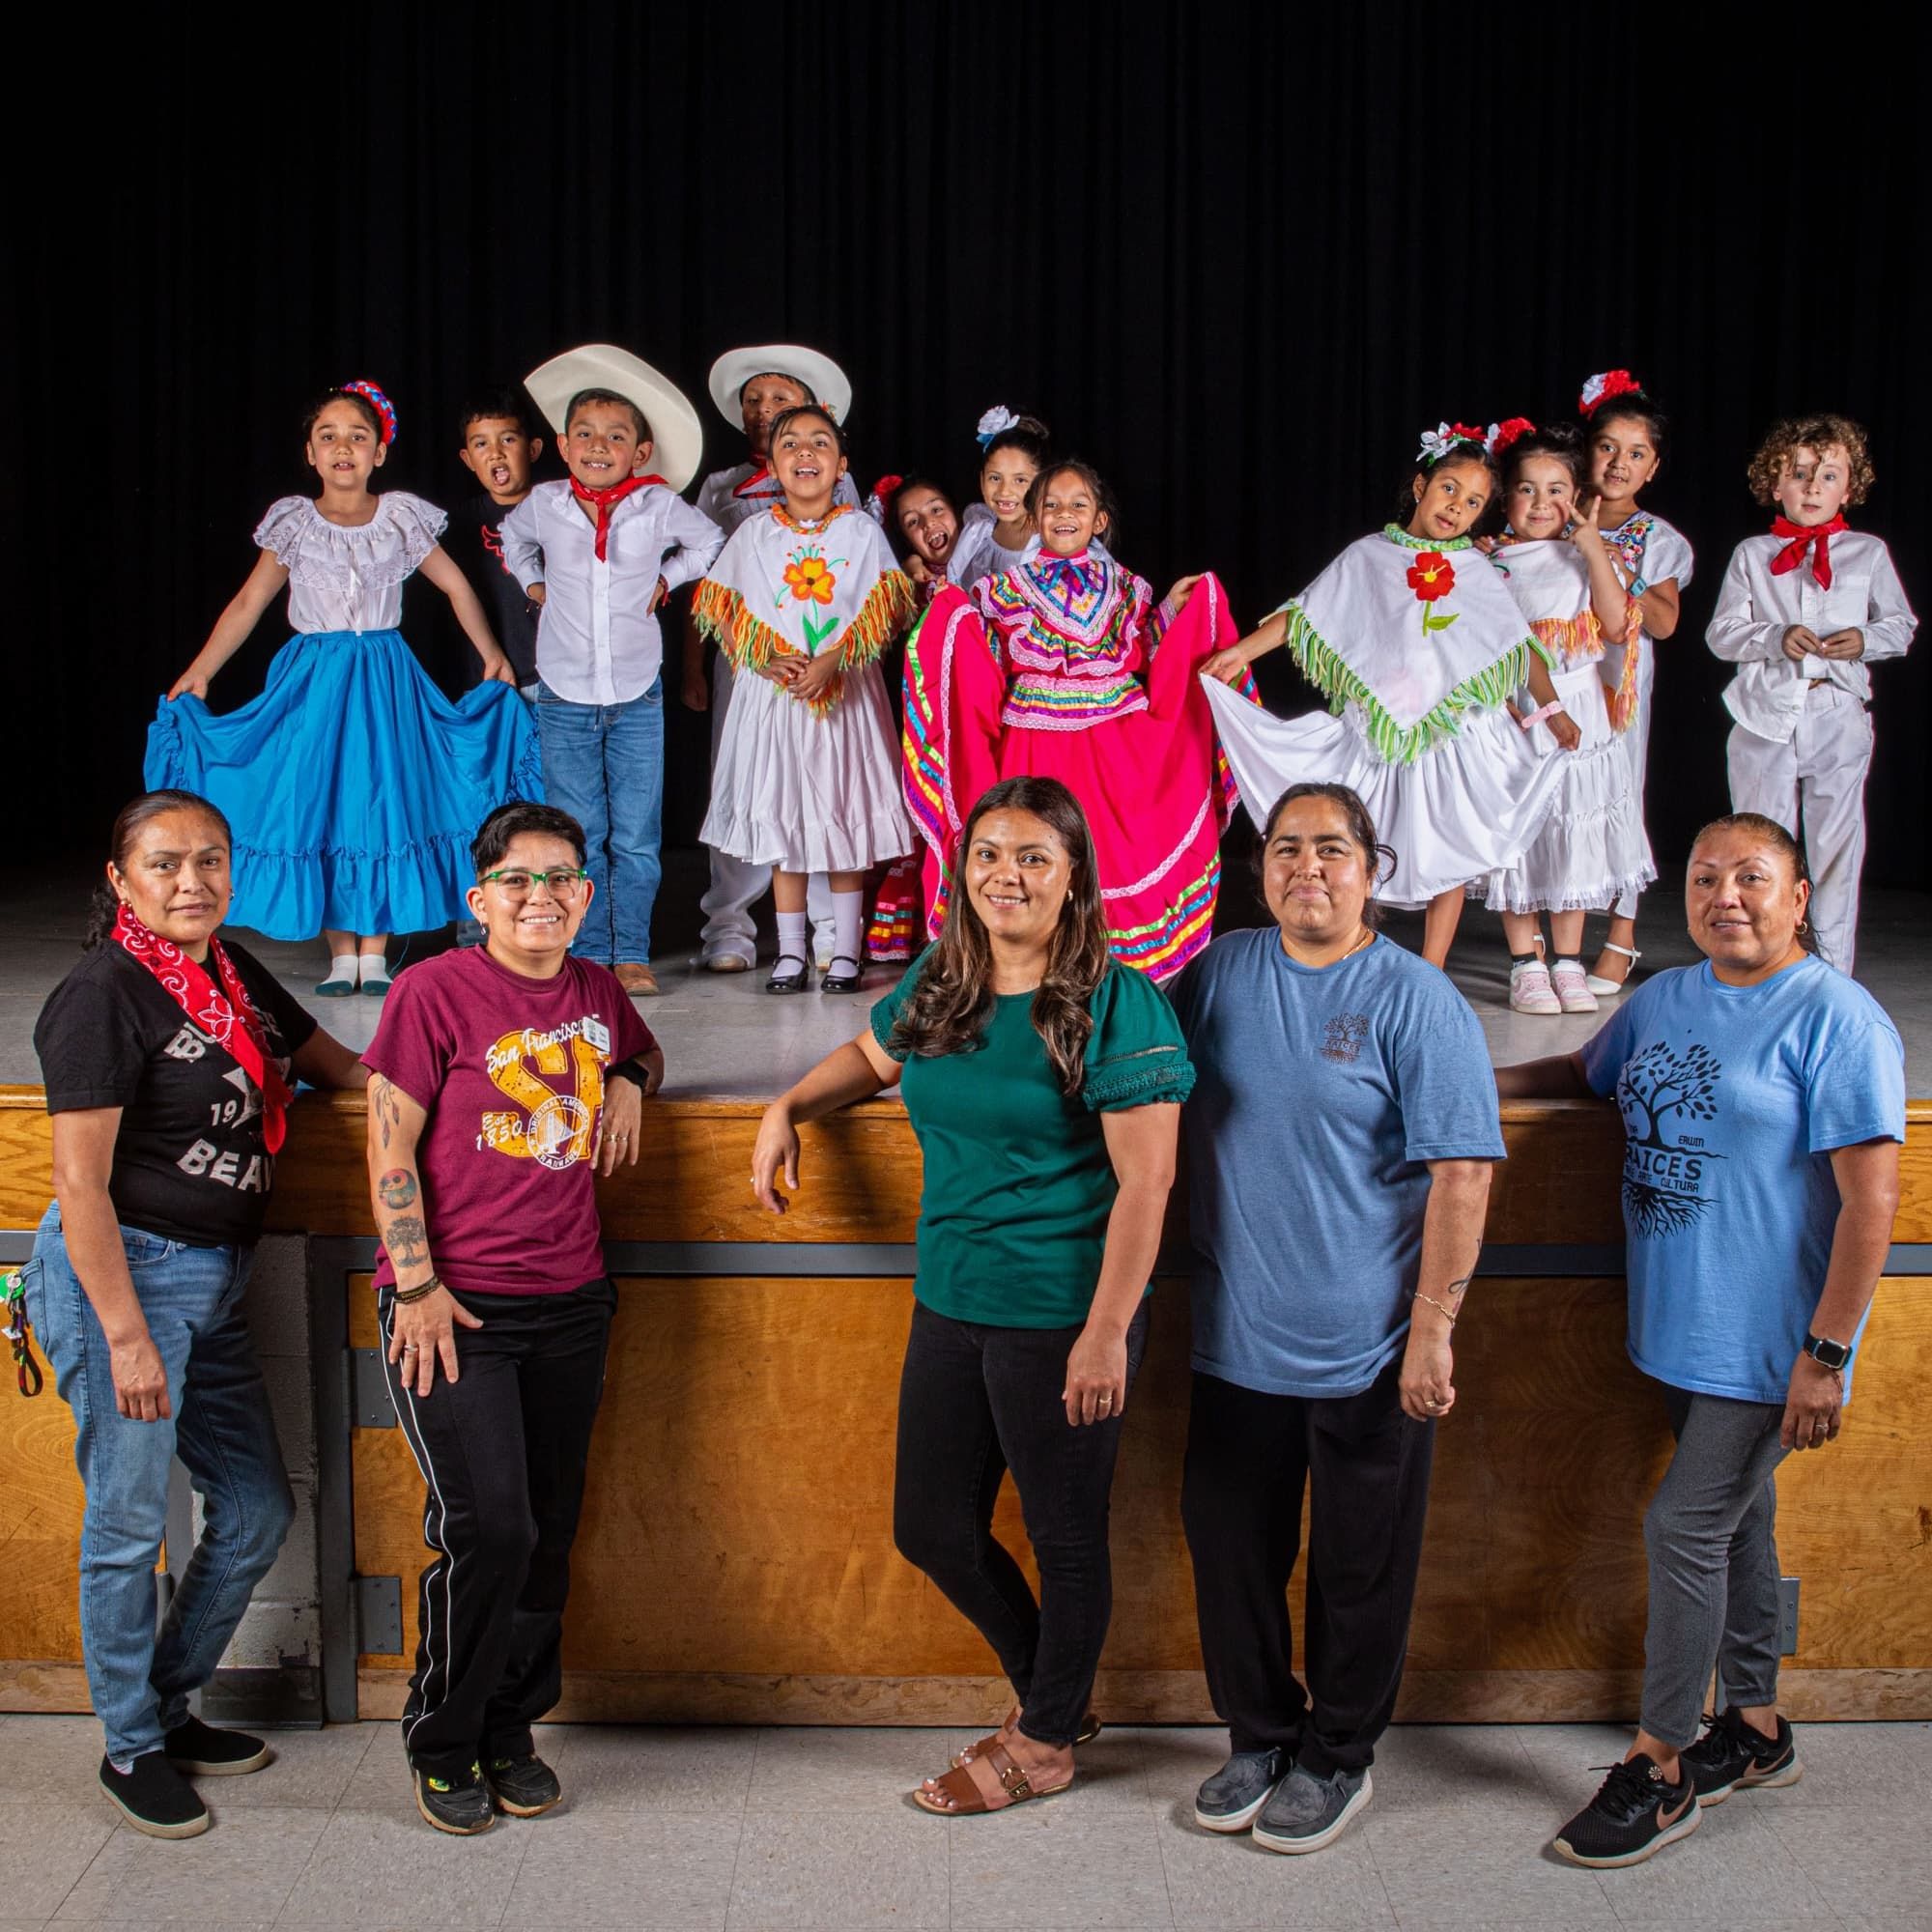 On a stage are a bunch of young kids dressed up and smiling with colorful skirts, white button down shirts, and cowboy hats or flowers. In front of the stage are five adults smiling and staring at the camera.